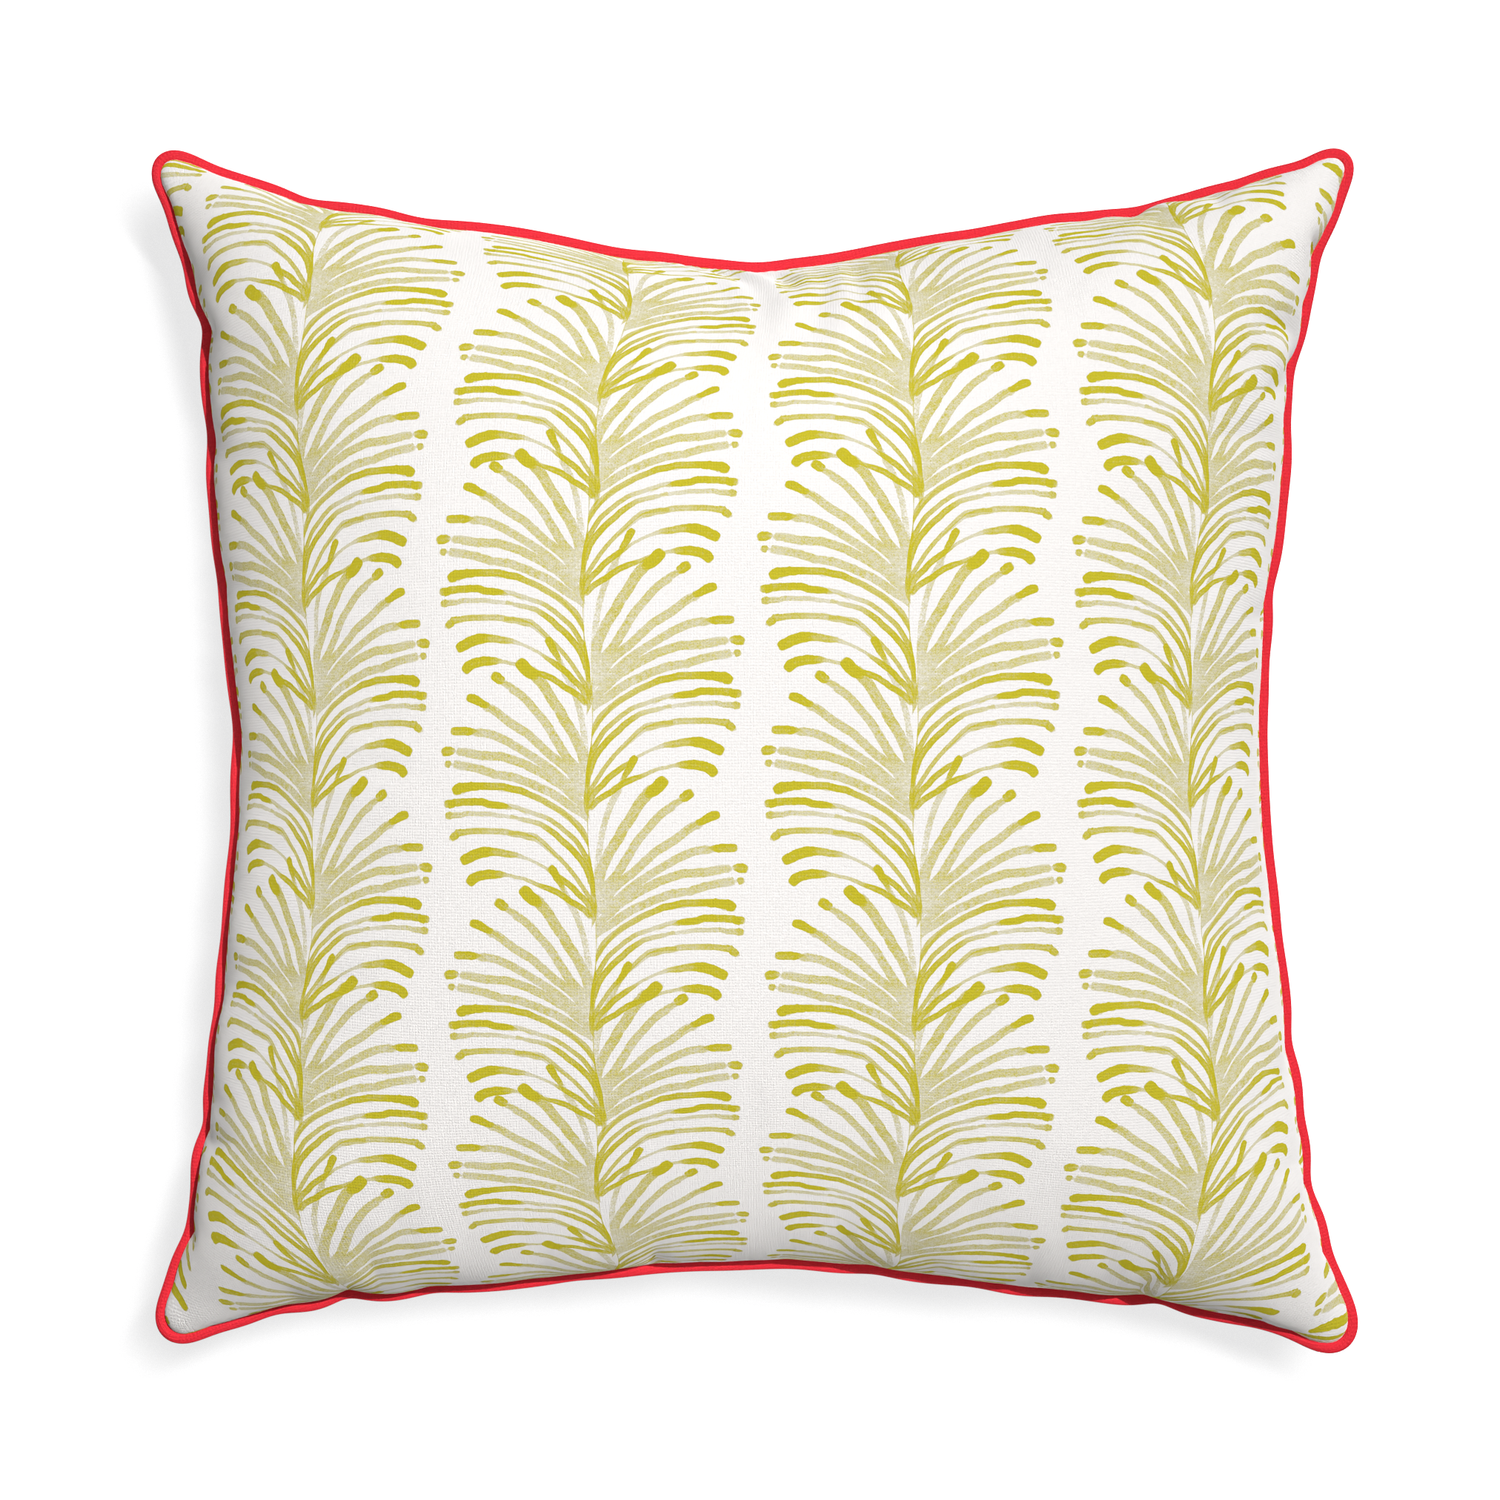 Euro-sham emma chartreuse custom pillow with cherry piping on white background